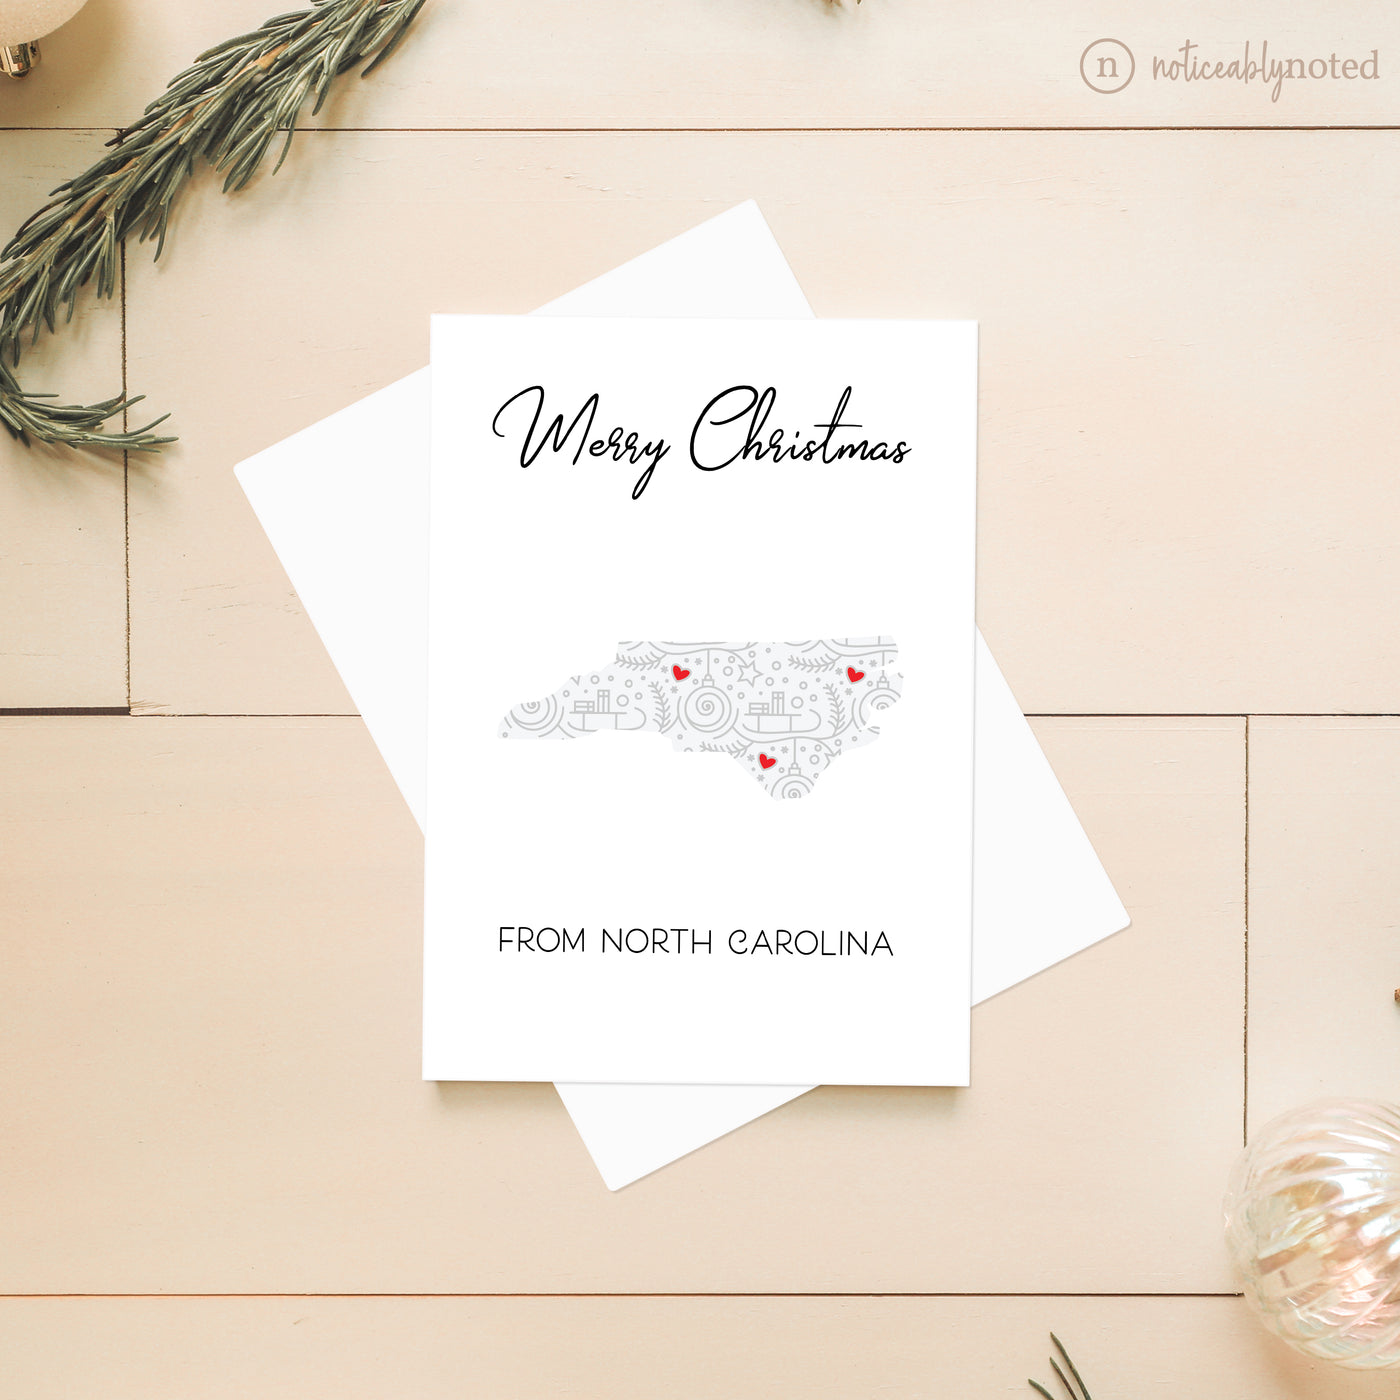 North Carolina Christmas Cards | Noticeably Noted